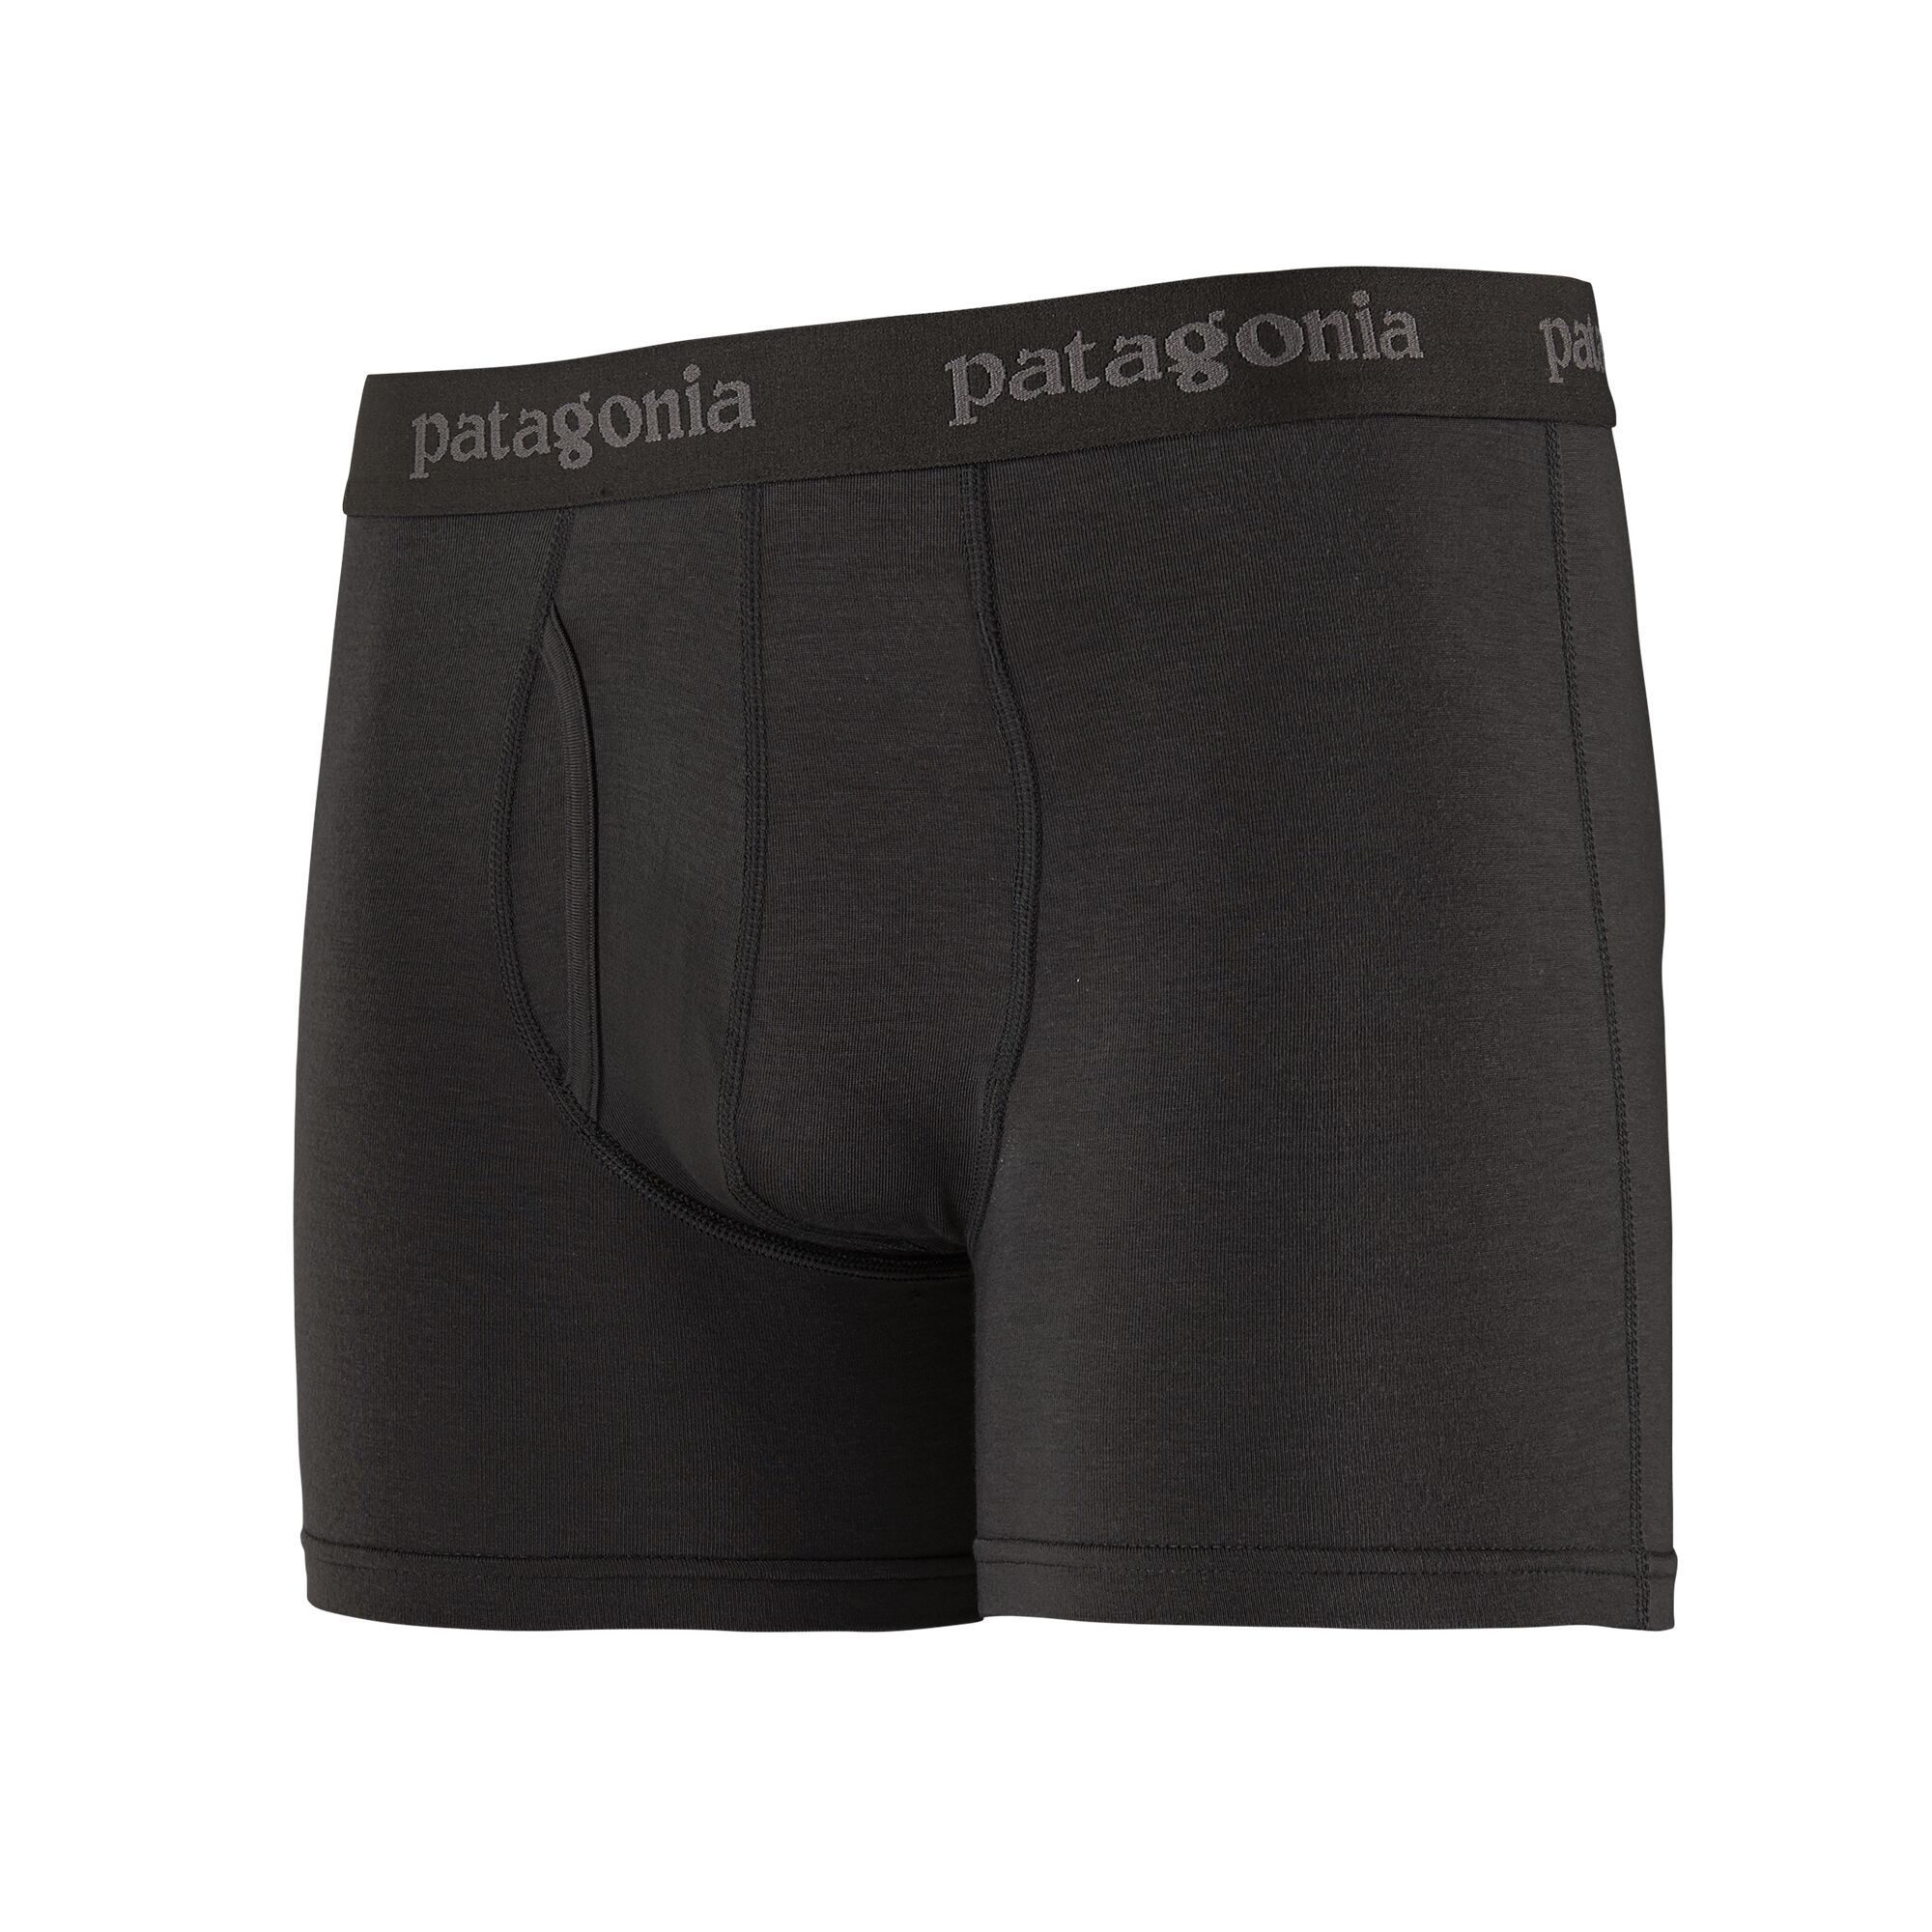 Patagonia Essential Boxer Briefs - From Wood-based TENCEL, New Navy / XL / 3"